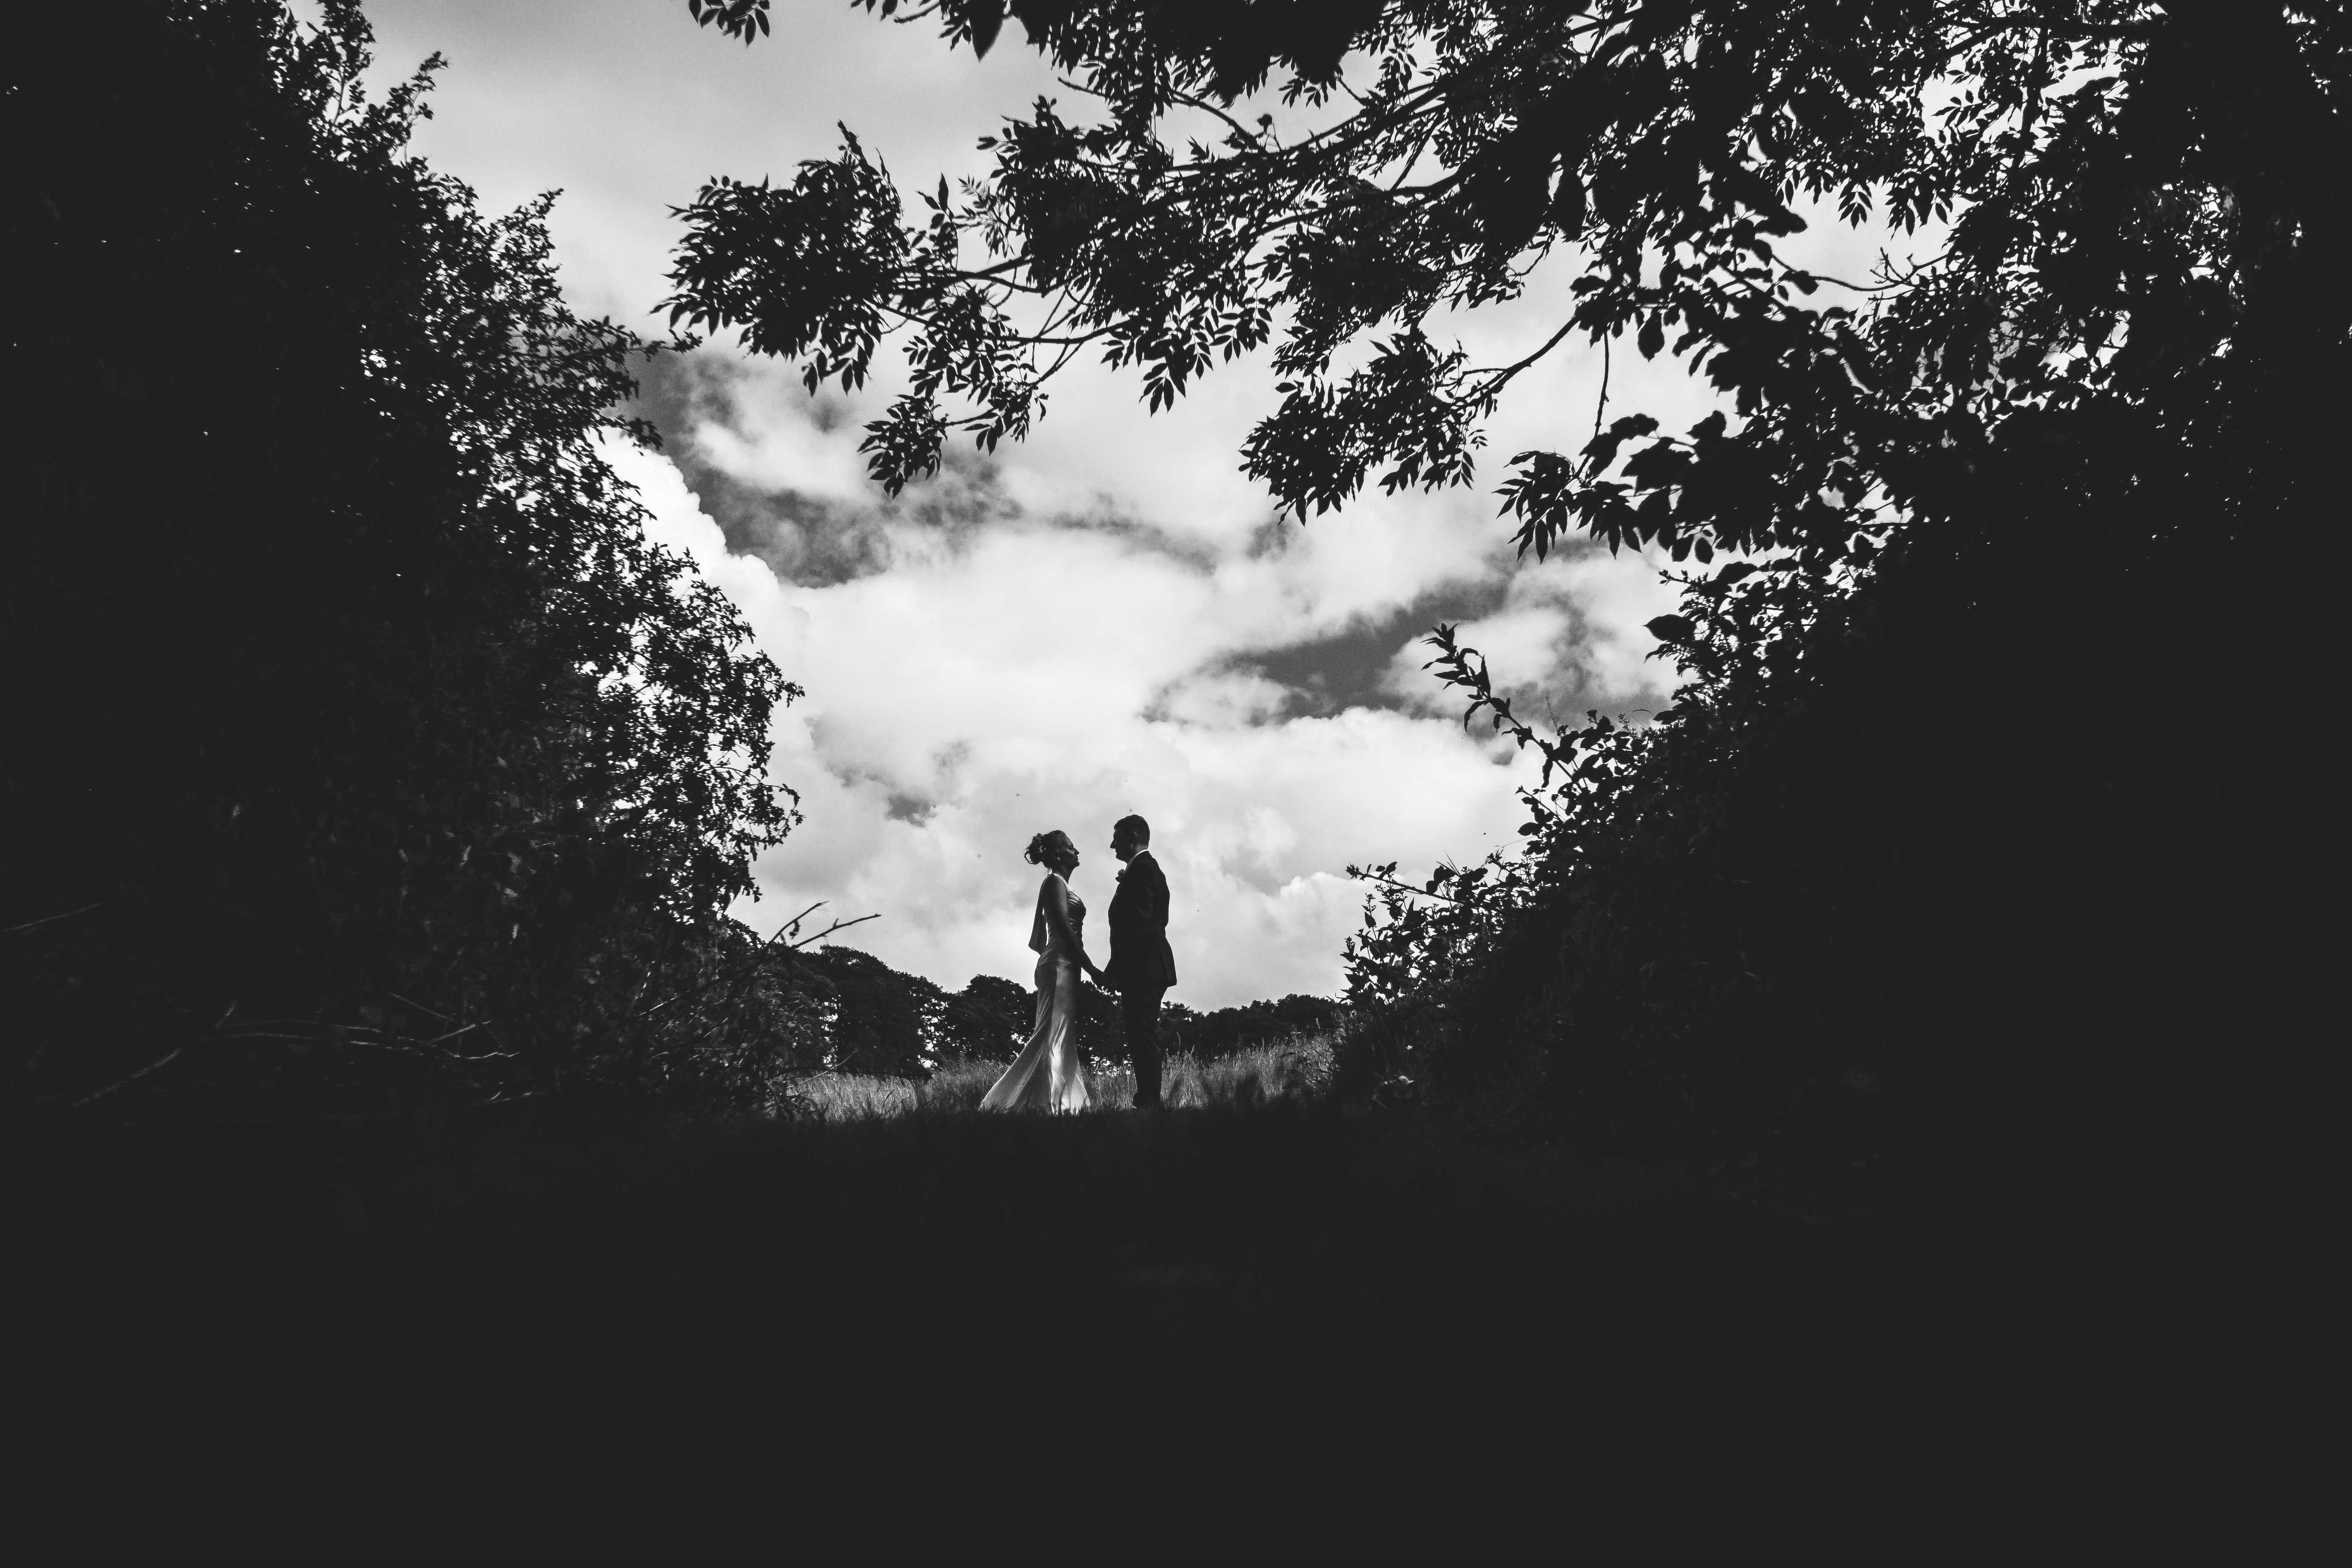 black & white silhouette portrait of bride and groom in a field surrounding by over hanging trees and cloudy skies